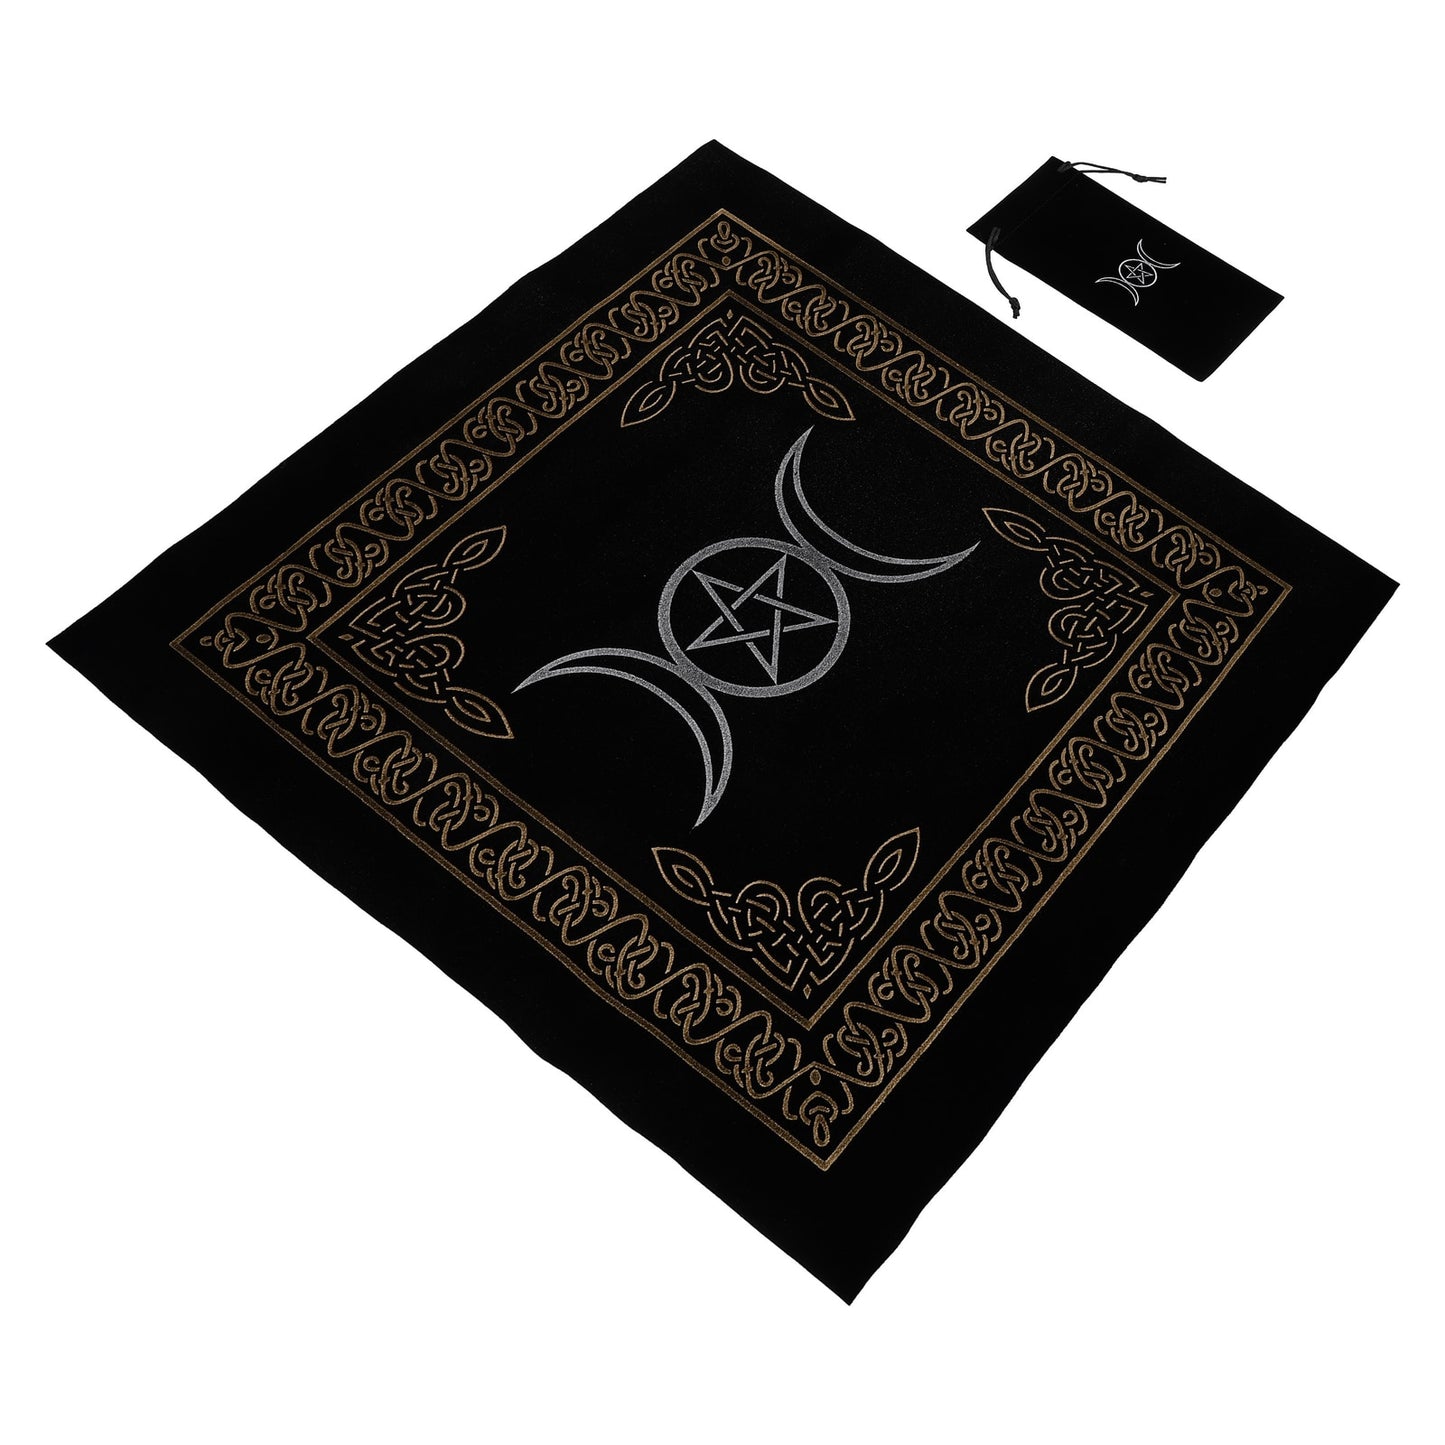 Tarot Pentagram and Moon Divination Mat | Pentacle Divination Tablecloth for Wiccans, Occult Practice